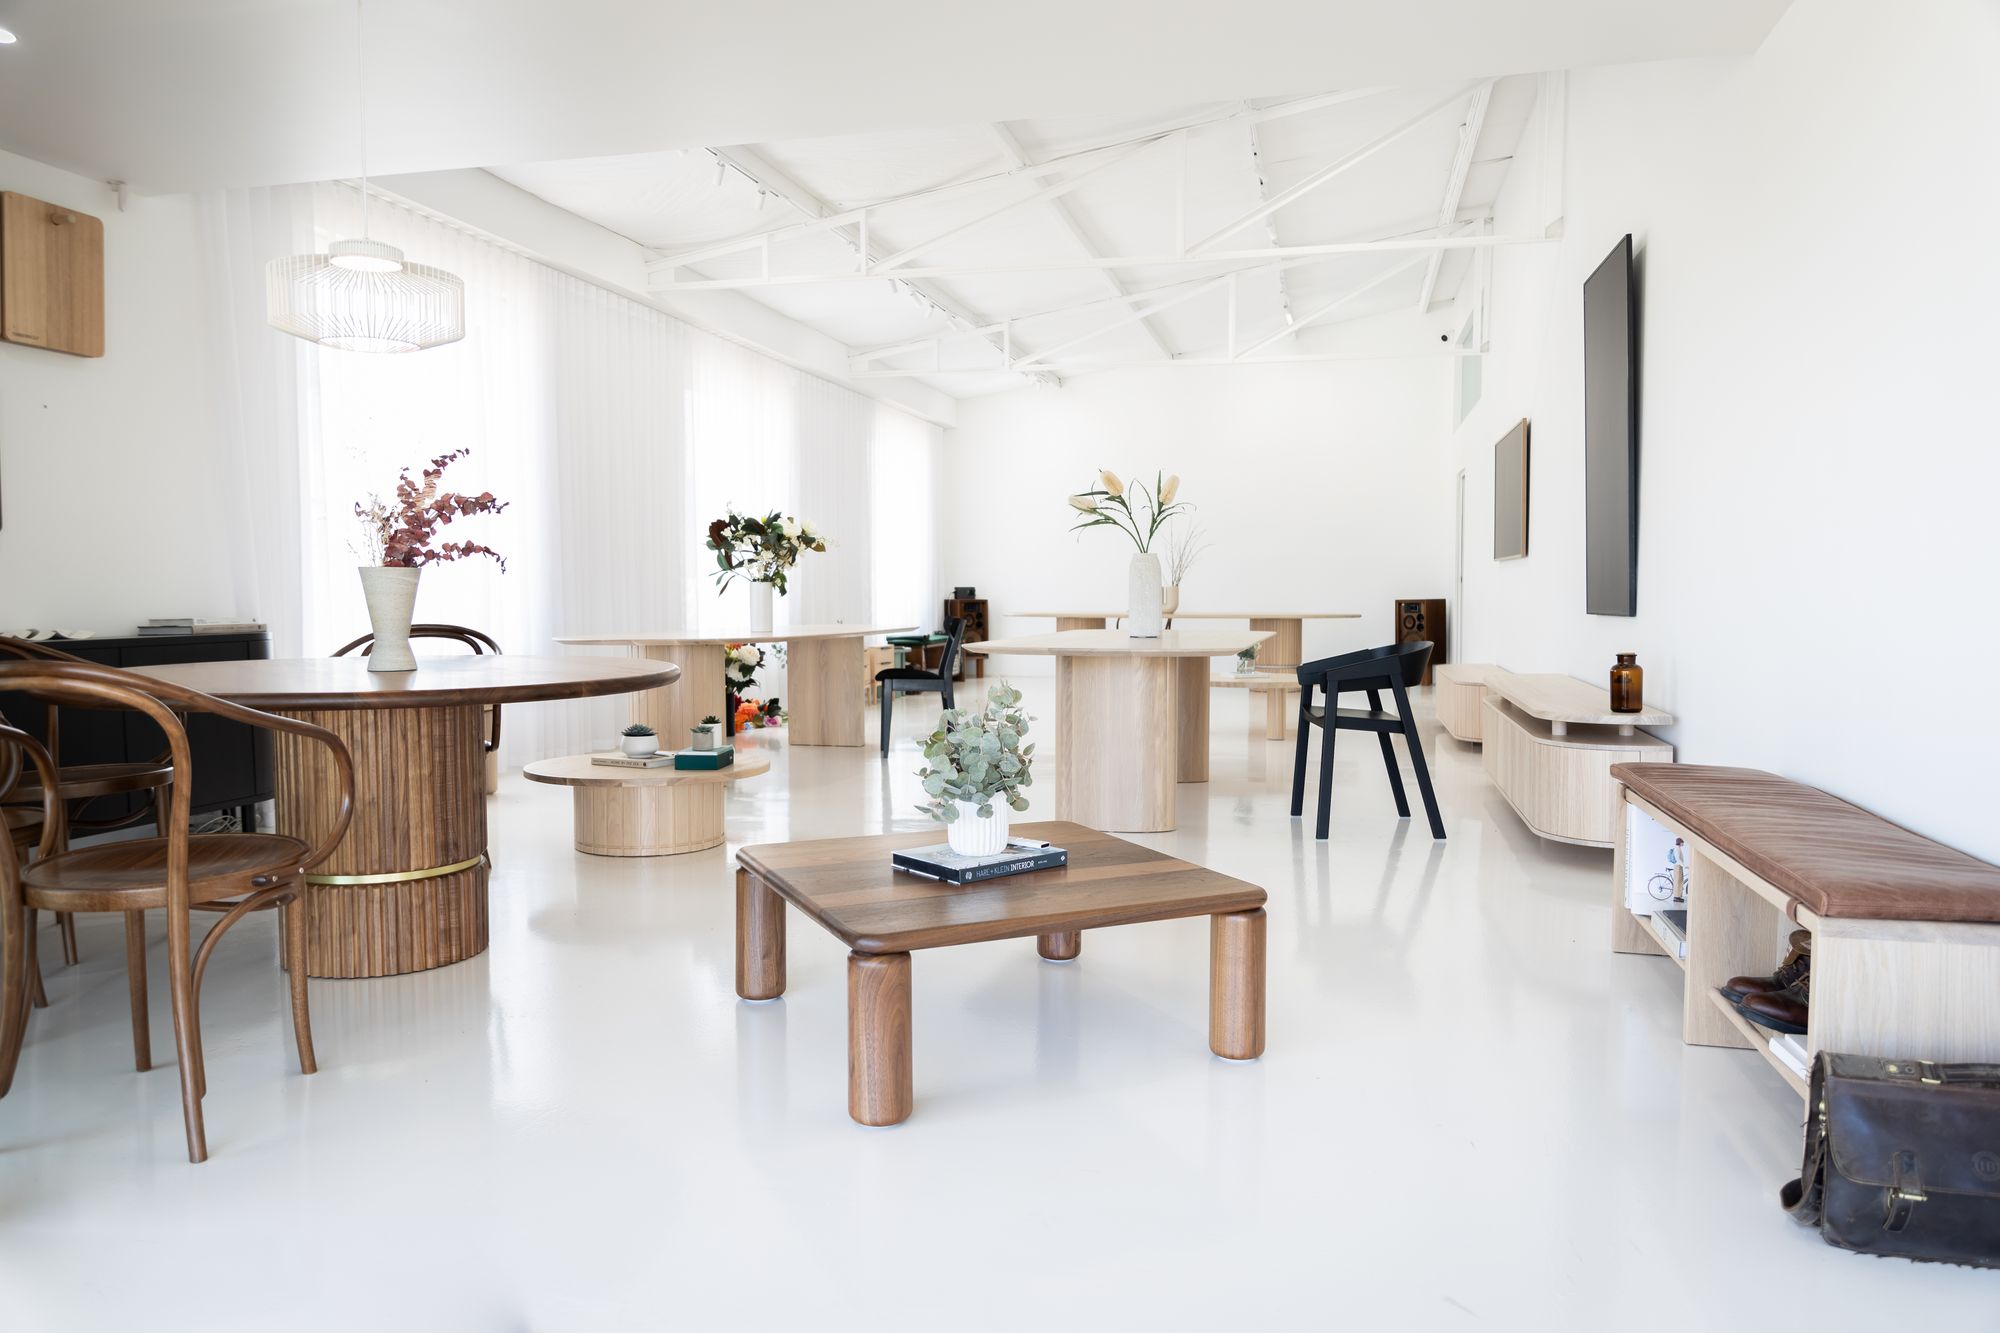 interior showcases a variety of furniture pieces in a white-walled room with a glossy white floor, reflecting the natural light entering through the sheer curtains. The space feels like a curated gallery with a mix of round and rectangular wooden tables, bentwood chairs, and unique bench seating with built-in storage. The aesthetic is modern with organic elements, and the room is accented with small potted plants, giving life to the minimalist design.